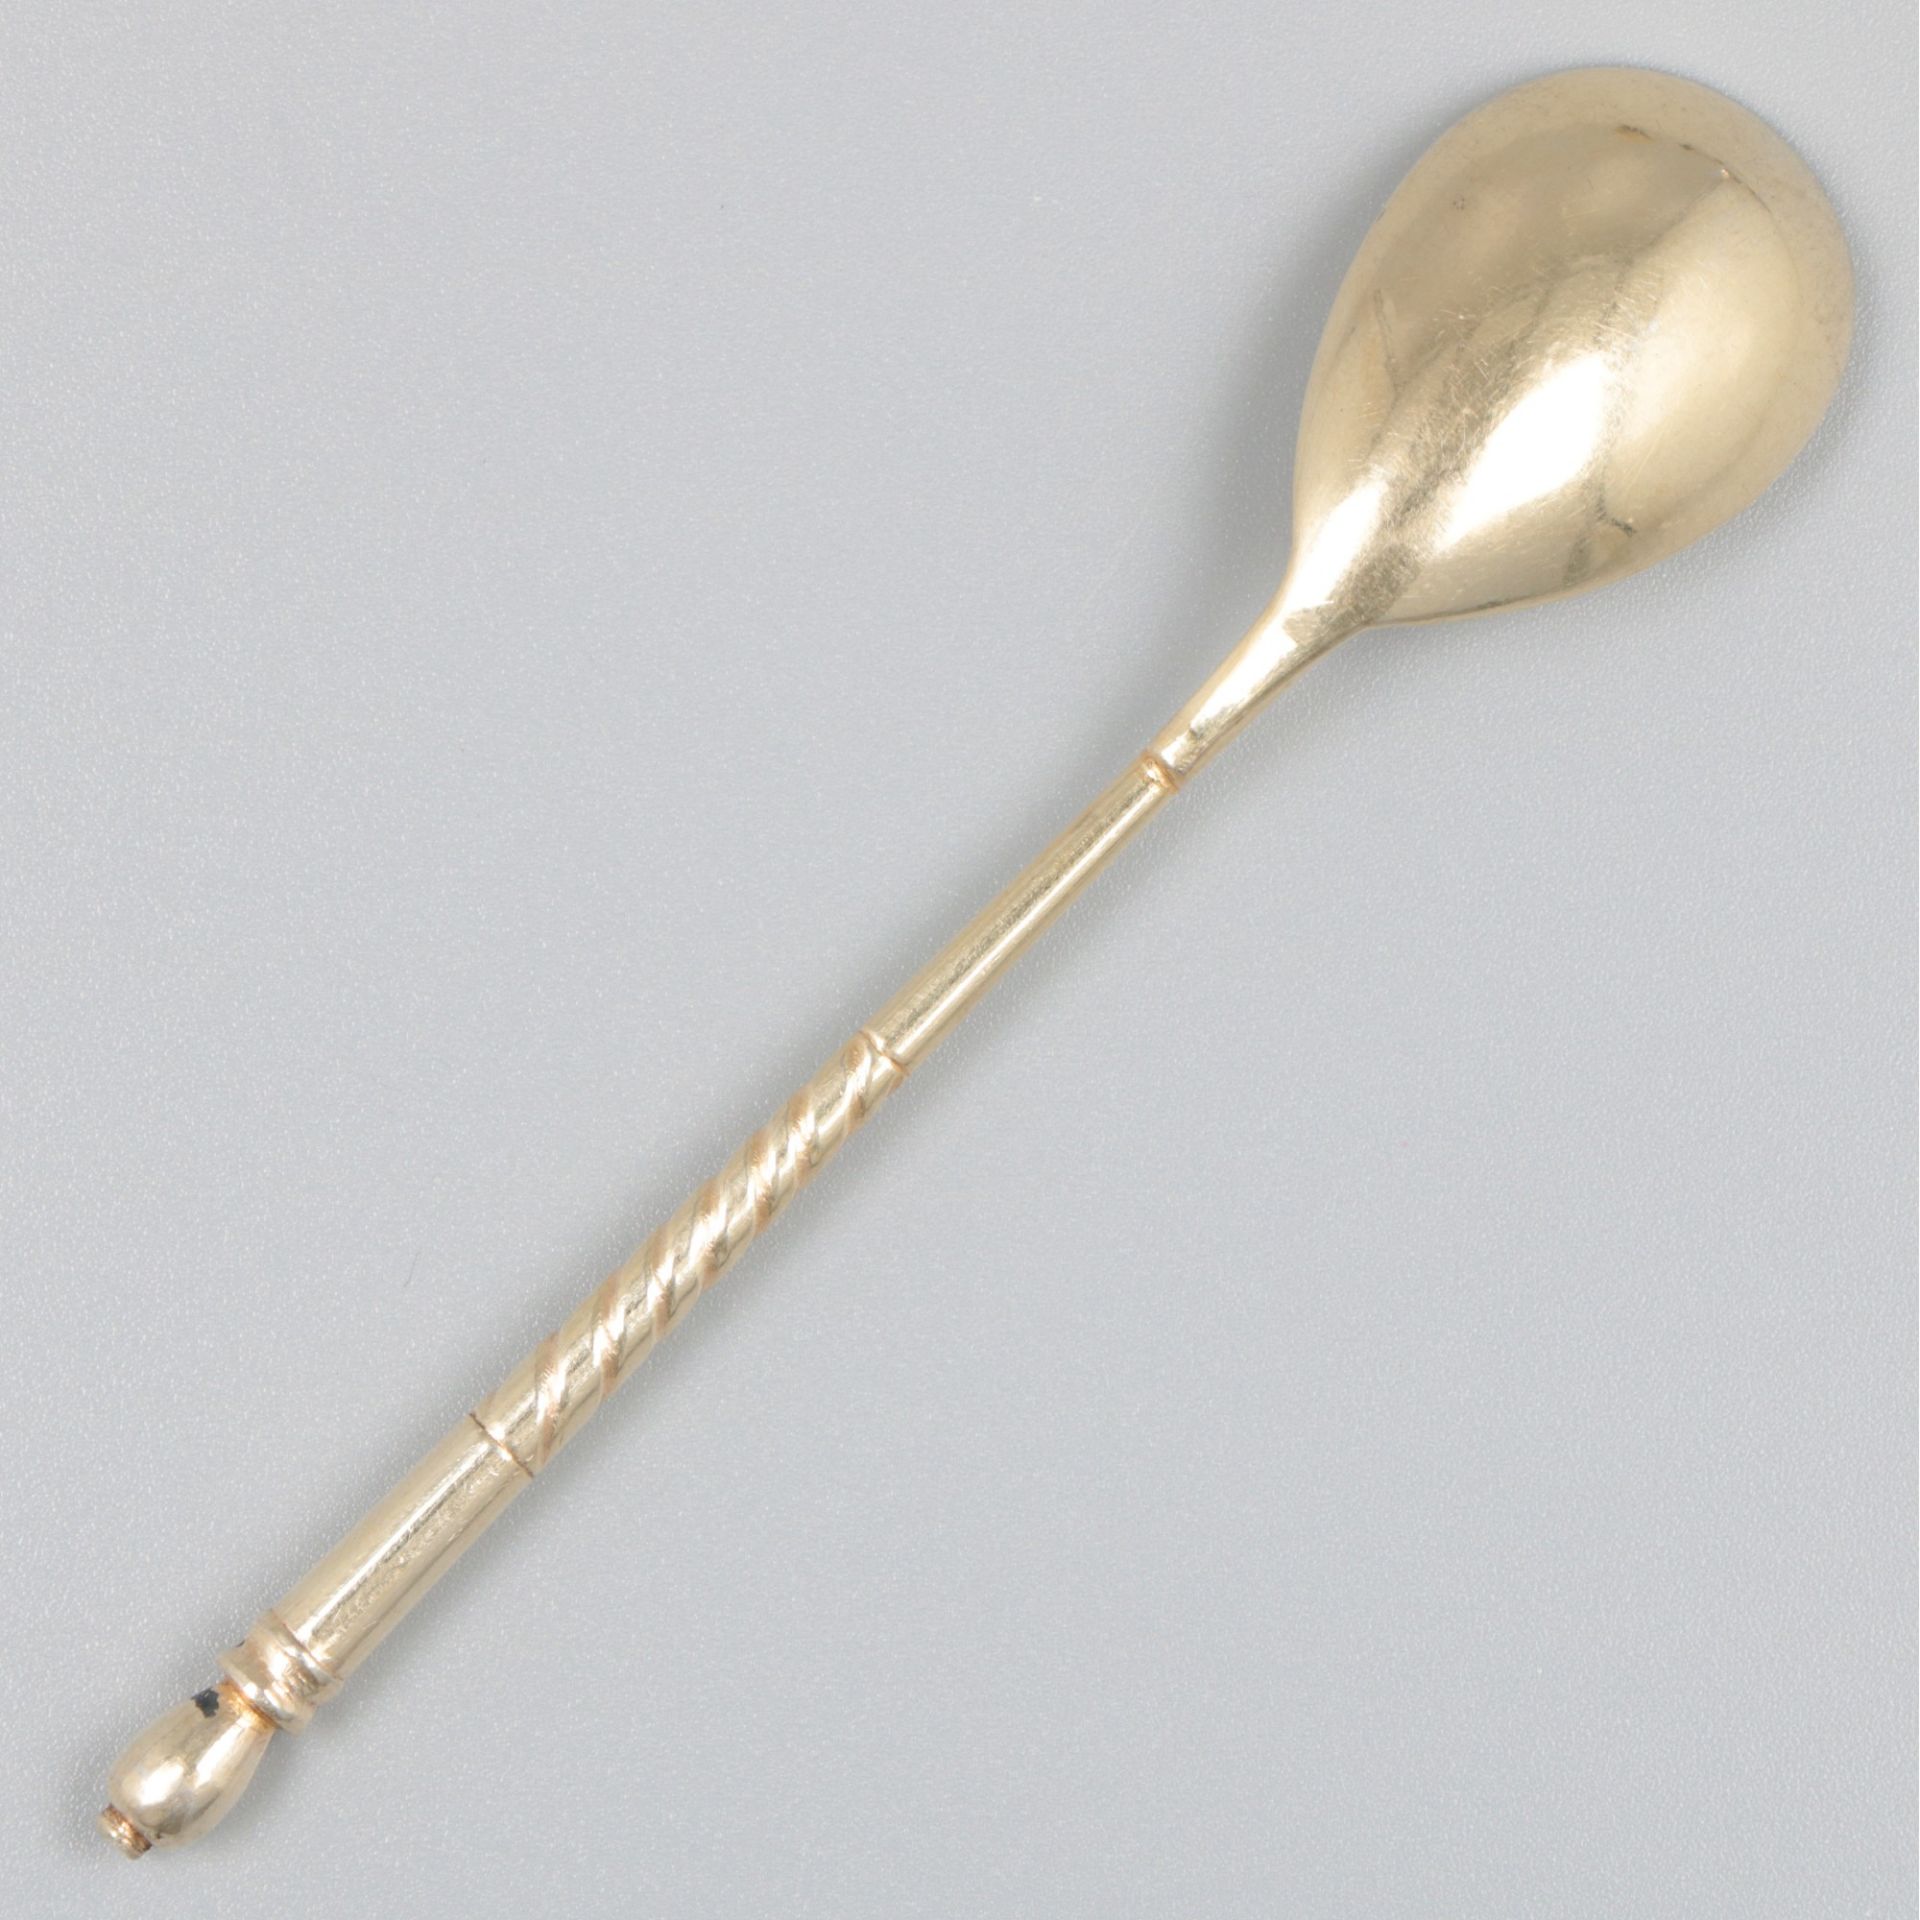 5-piece set of coffee spoons, silver. - Image 5 of 5